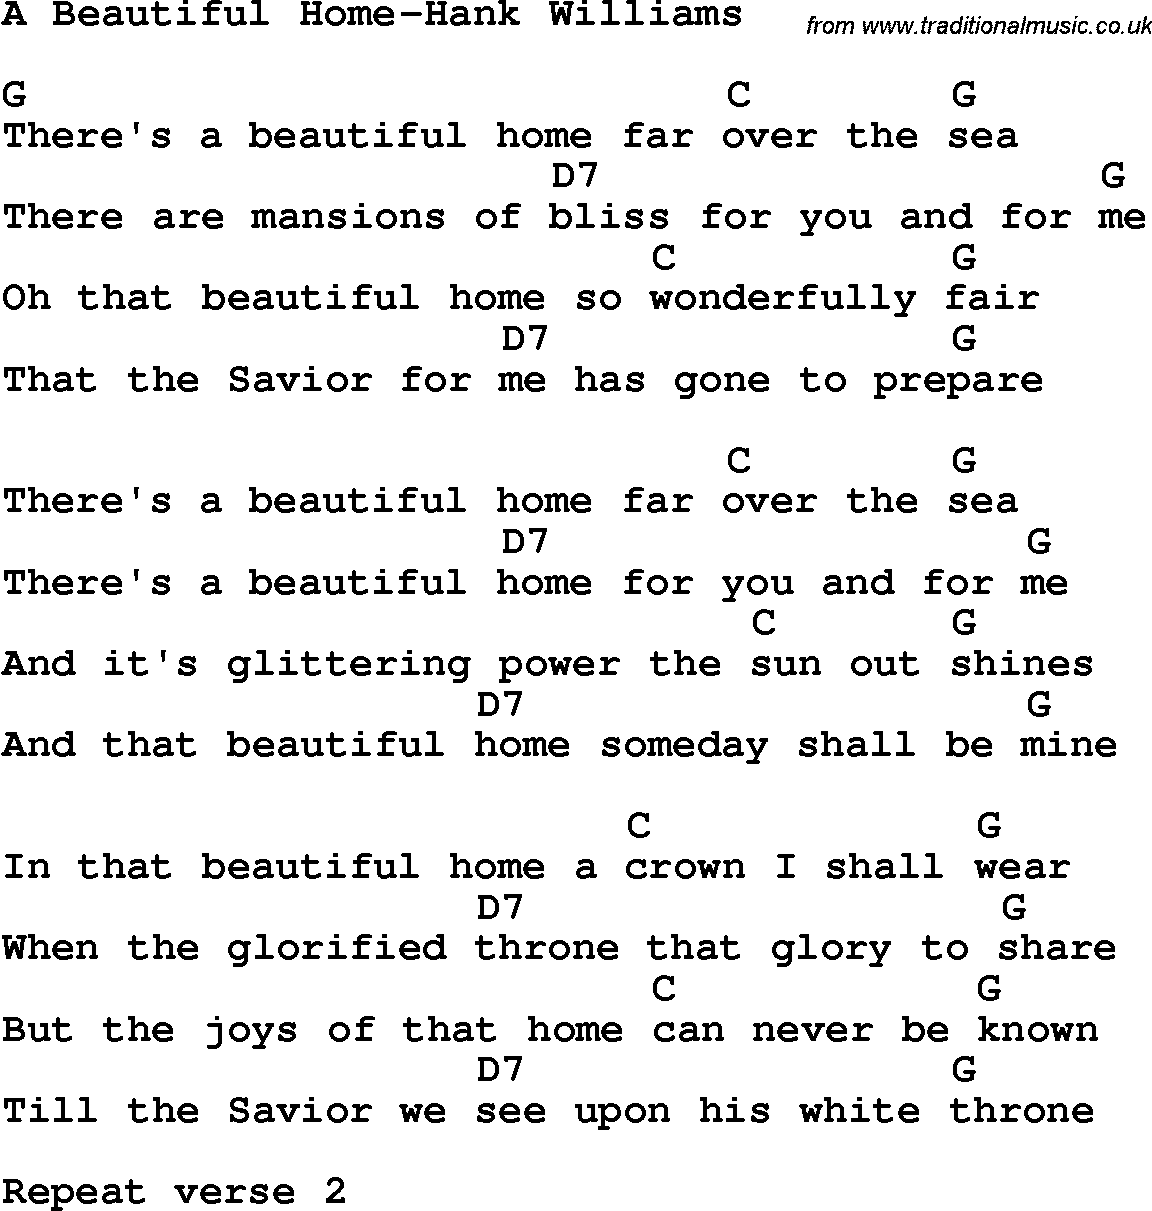 Country, Southern and Bluegrass Gospel Song A Beautiful Home-Hank Williams lyrics and chords